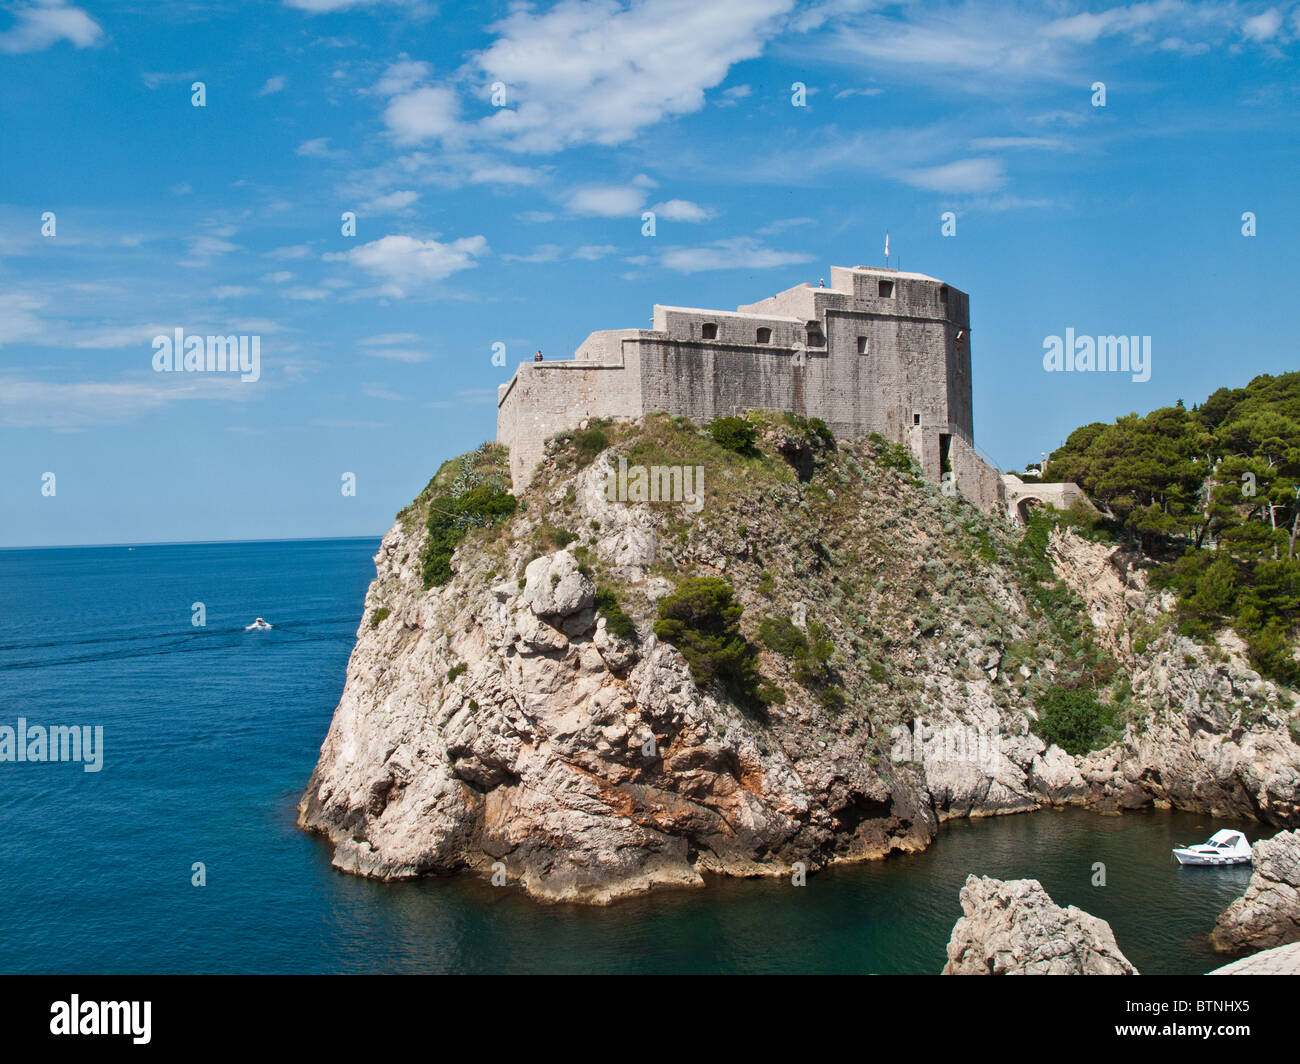 Ancient fortress on the cliff edge of Dubrovnik protects the port Stock Photo